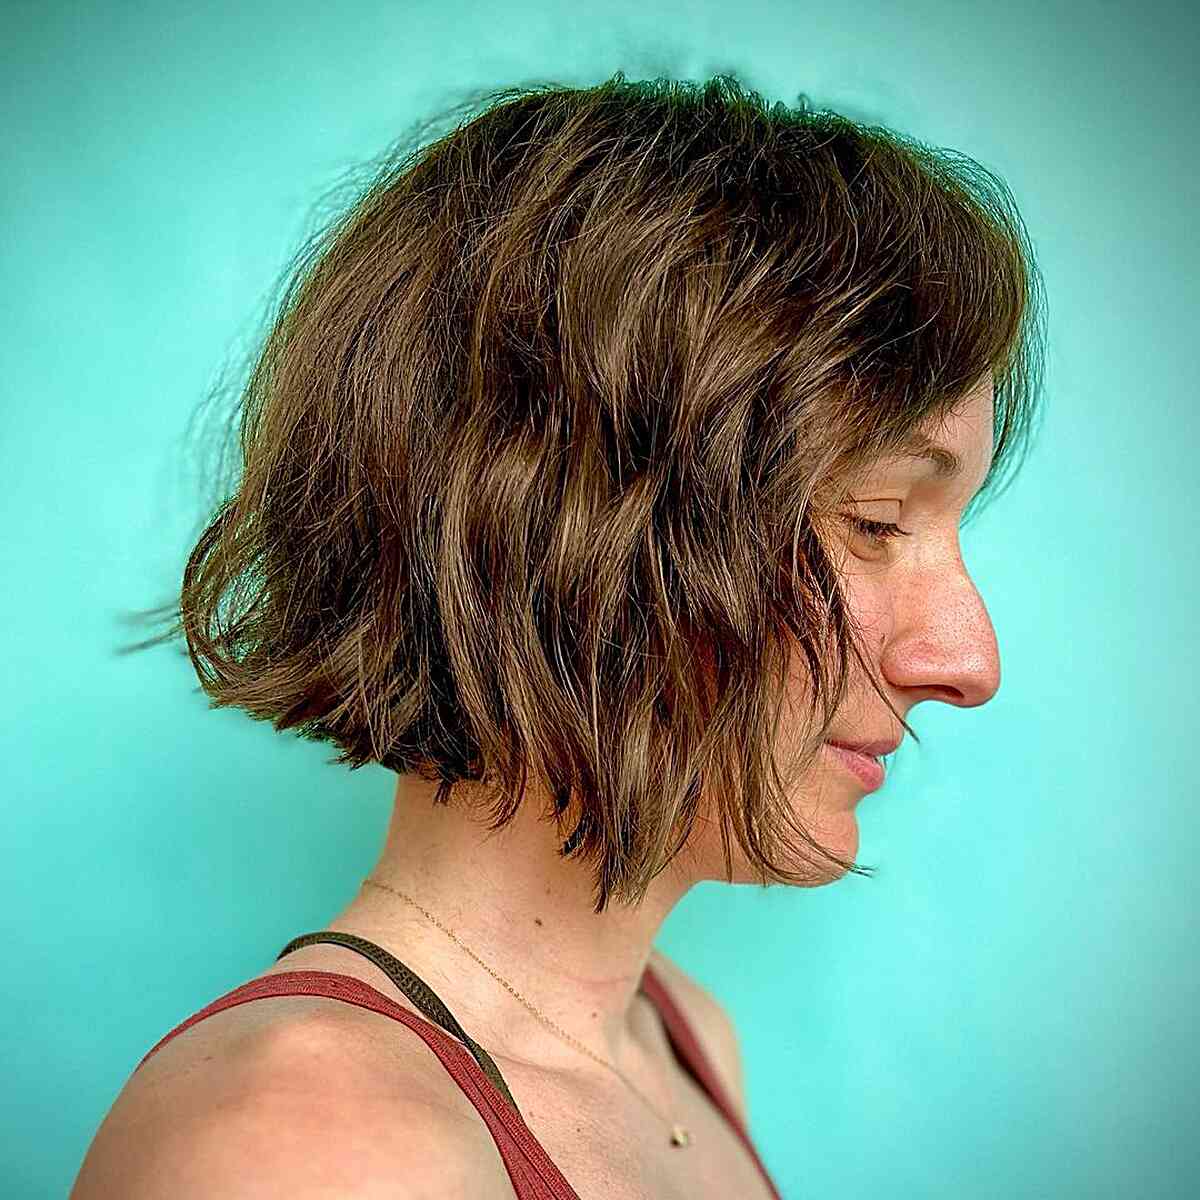 Chin-Length Shattered Bob with Tousled Waves